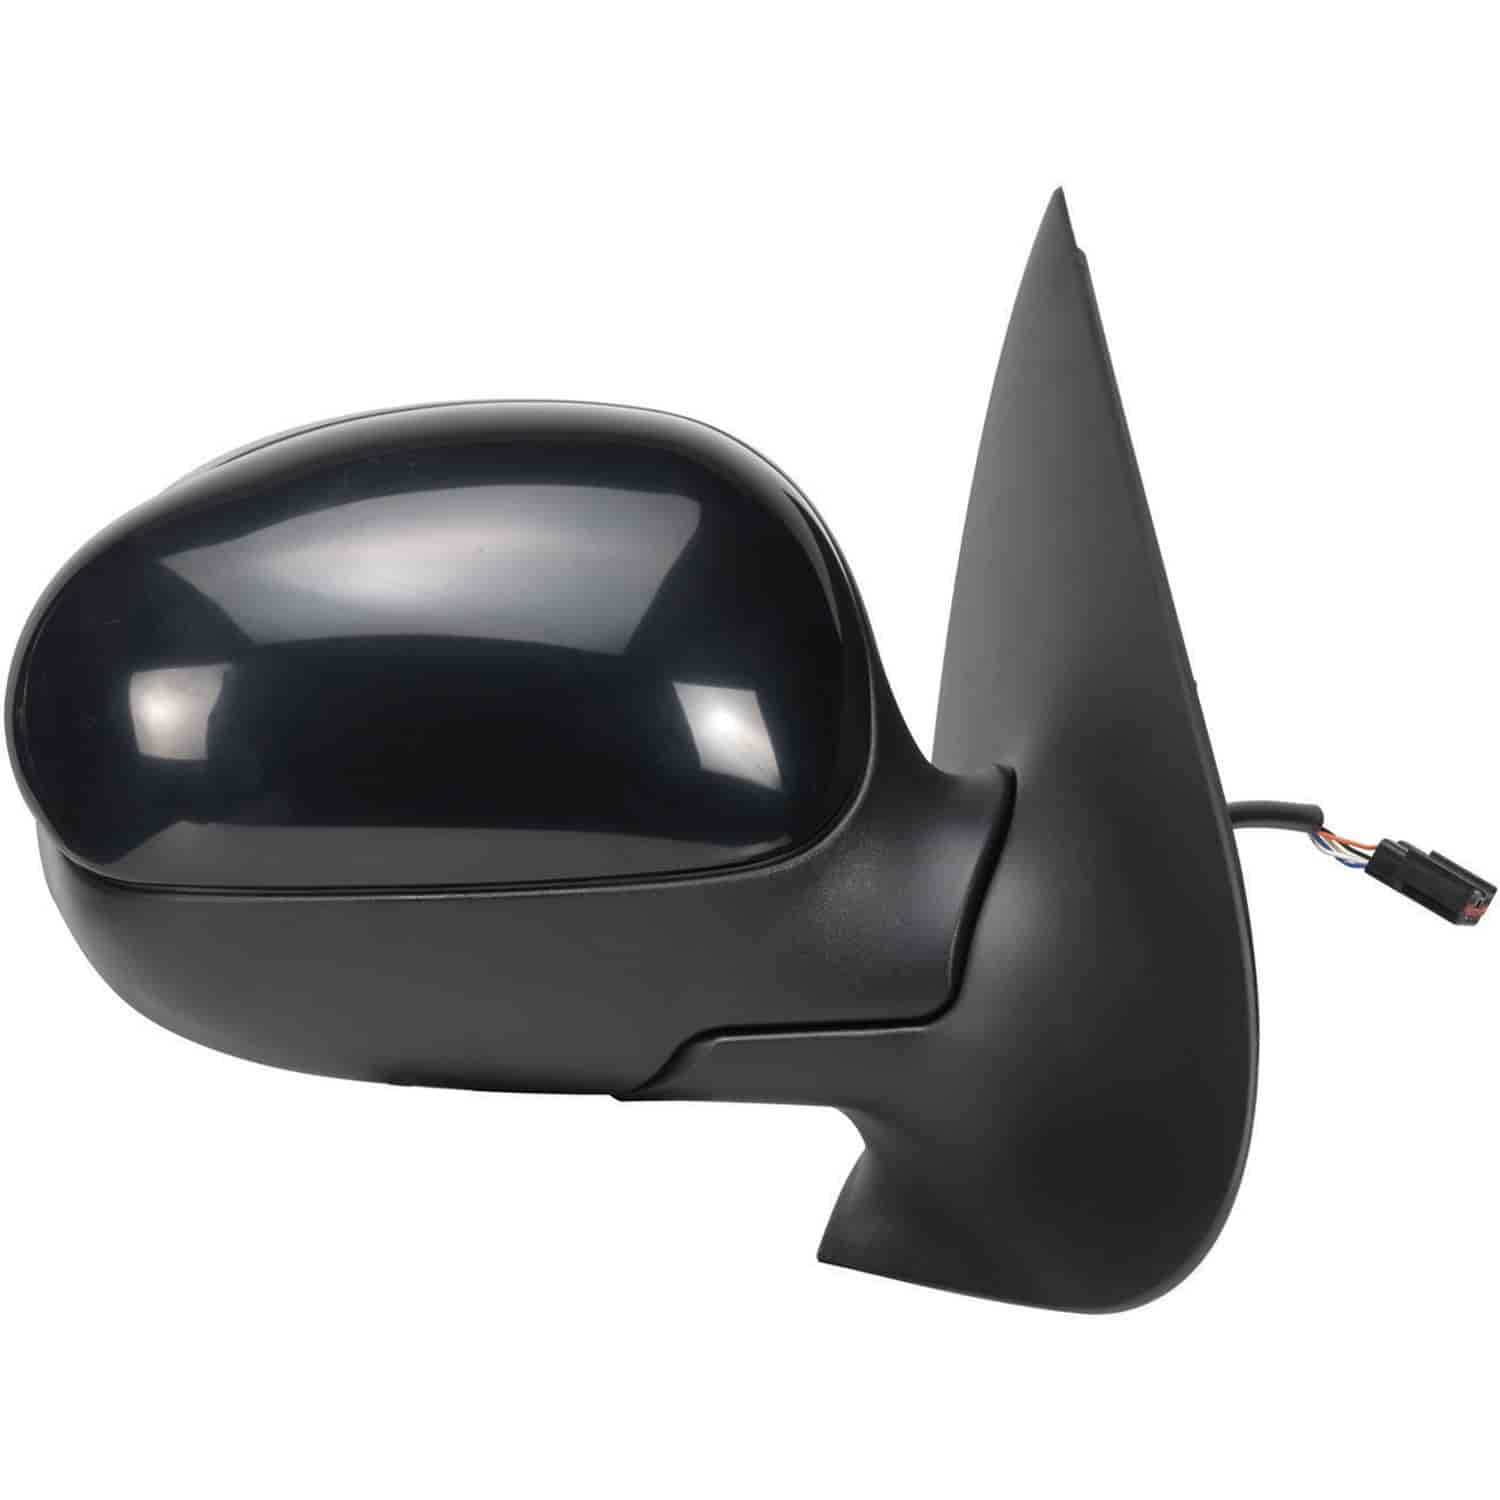 OEM Style Replacement mirror for 01-02 Expedition 00-02 Navigator passenger side mirror tested to fi